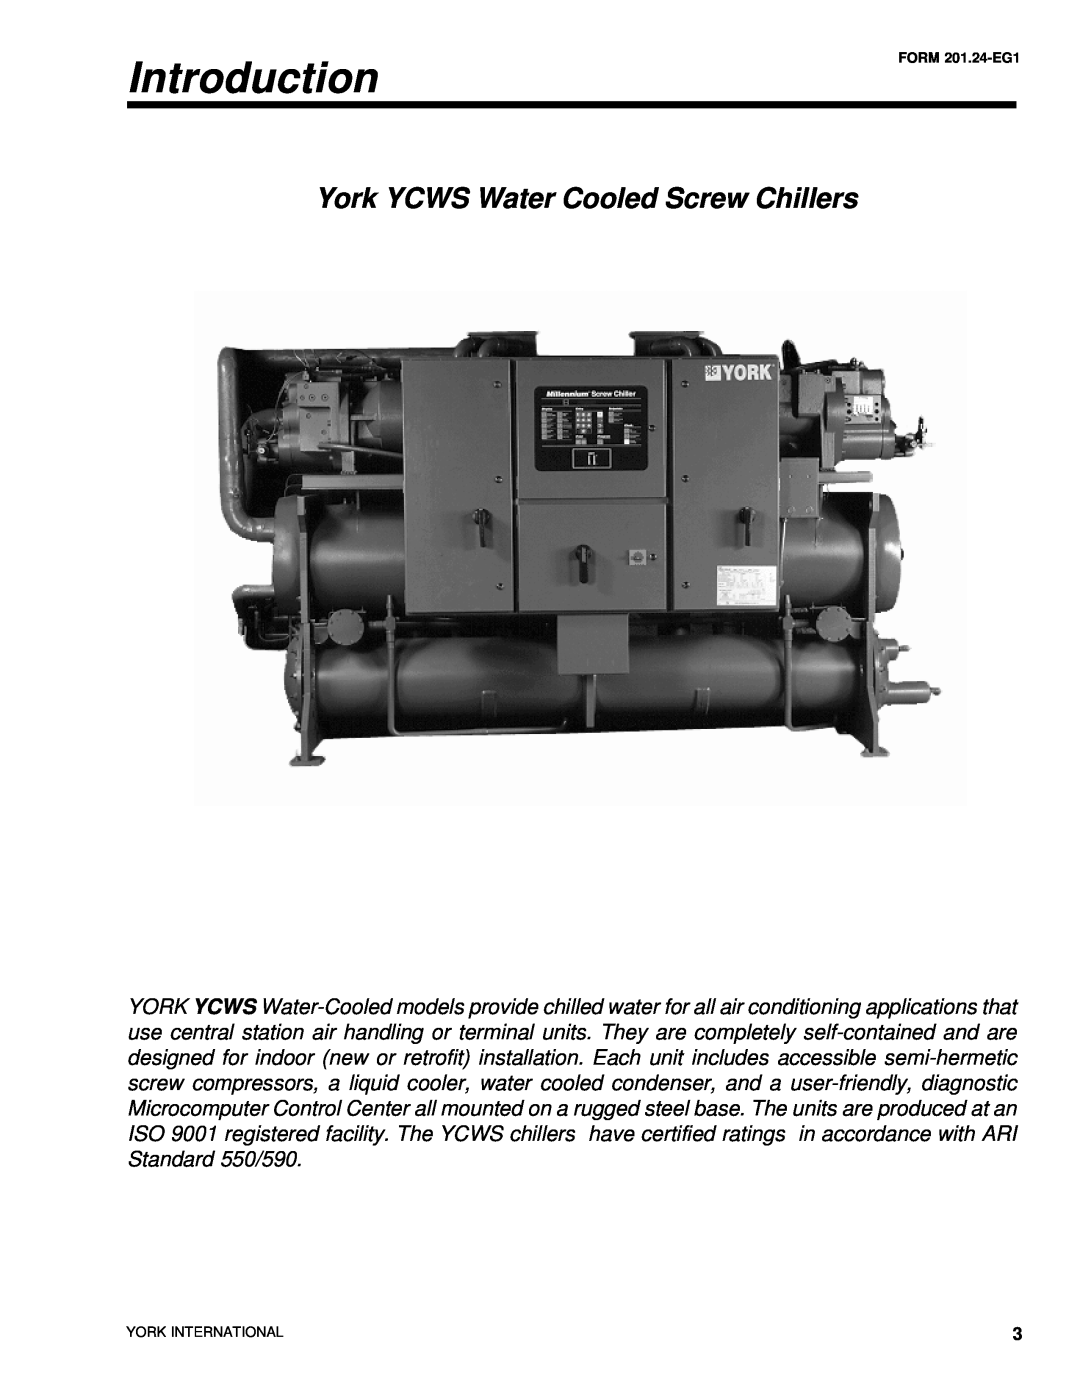 York manual Introduction, York YCWS Water Cooled Screw Chillers 